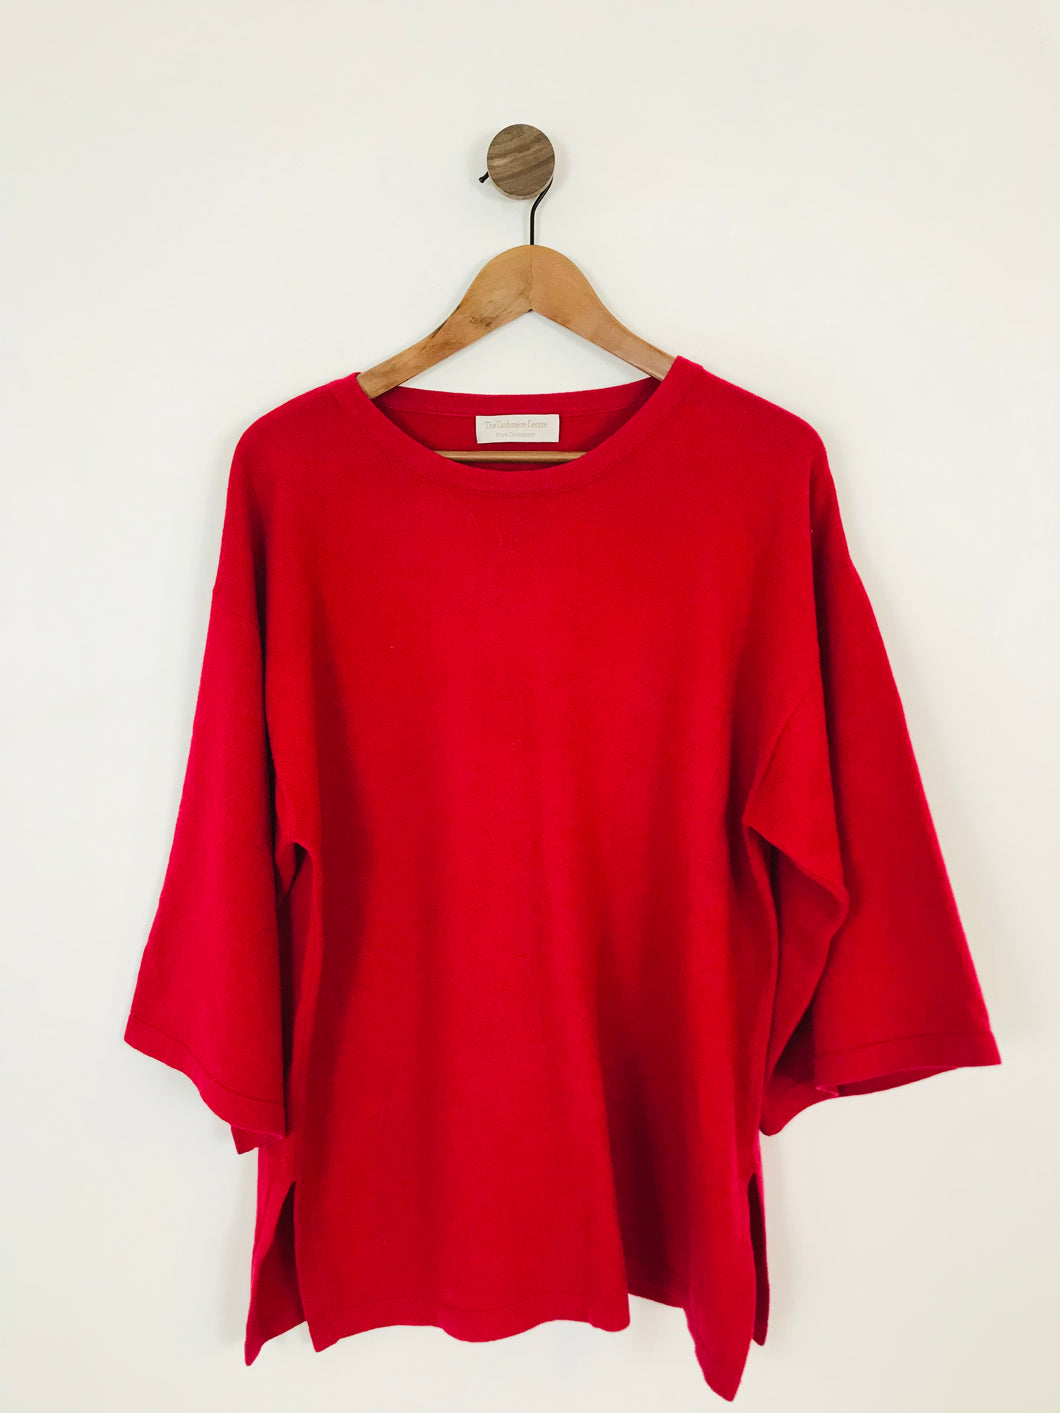 The Cashmere Centre Women’s 100% Cashmere Oversized Knit Jumper | L UK14-16 | Red